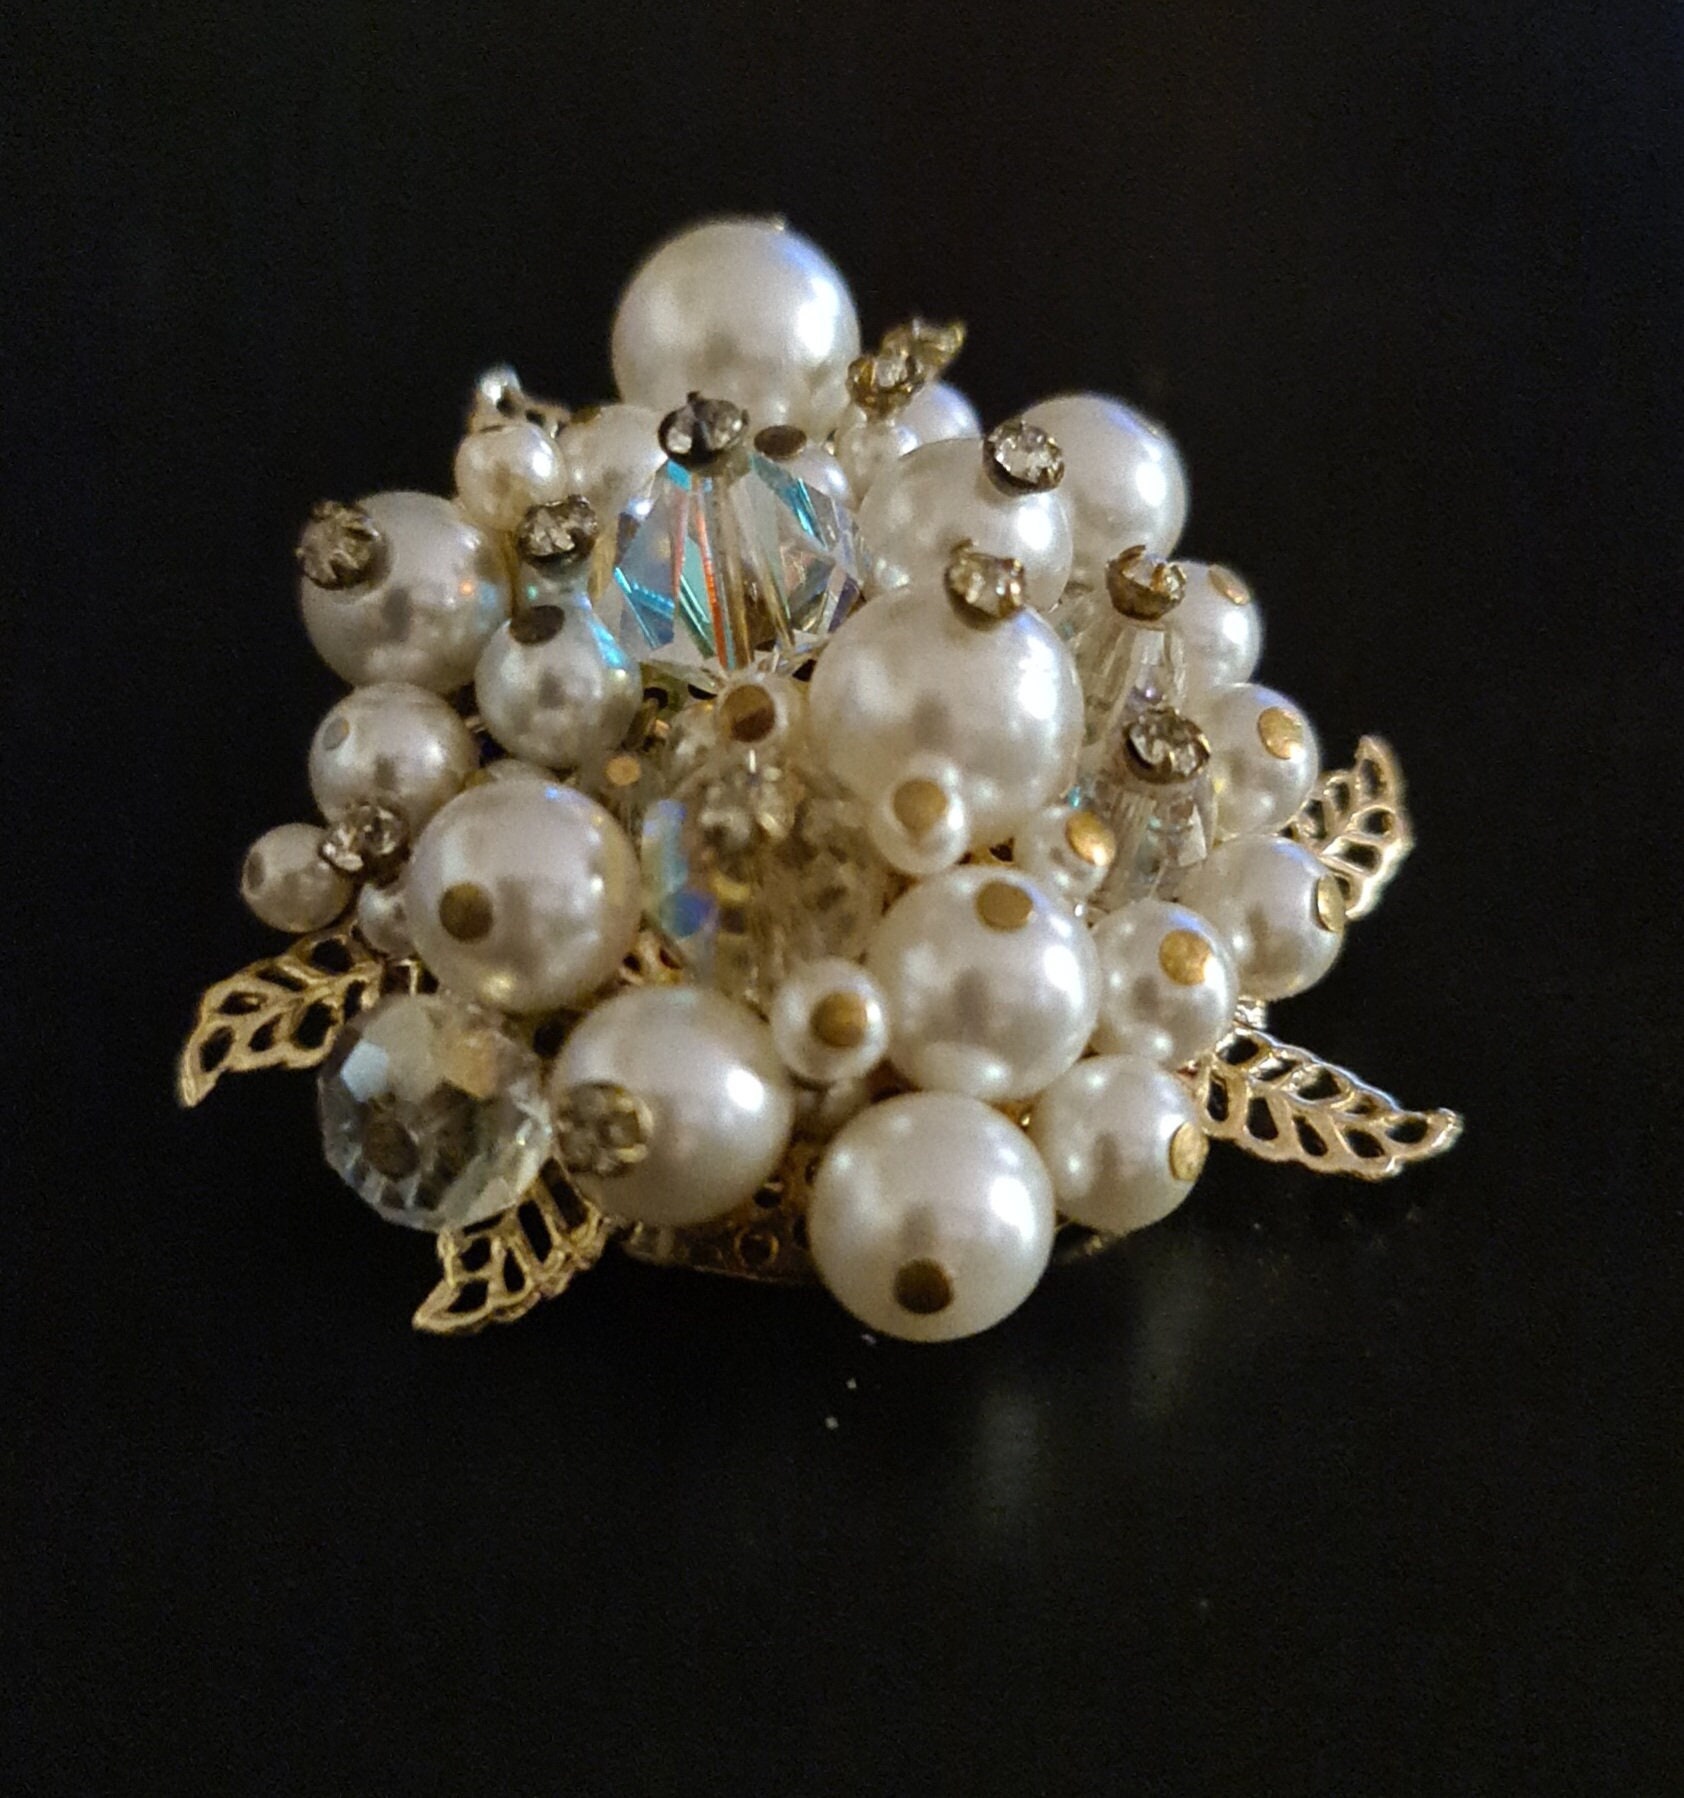 NEW in BOX 22K Chanel Brooch Pin Pearls Baguette Crystals Jewel